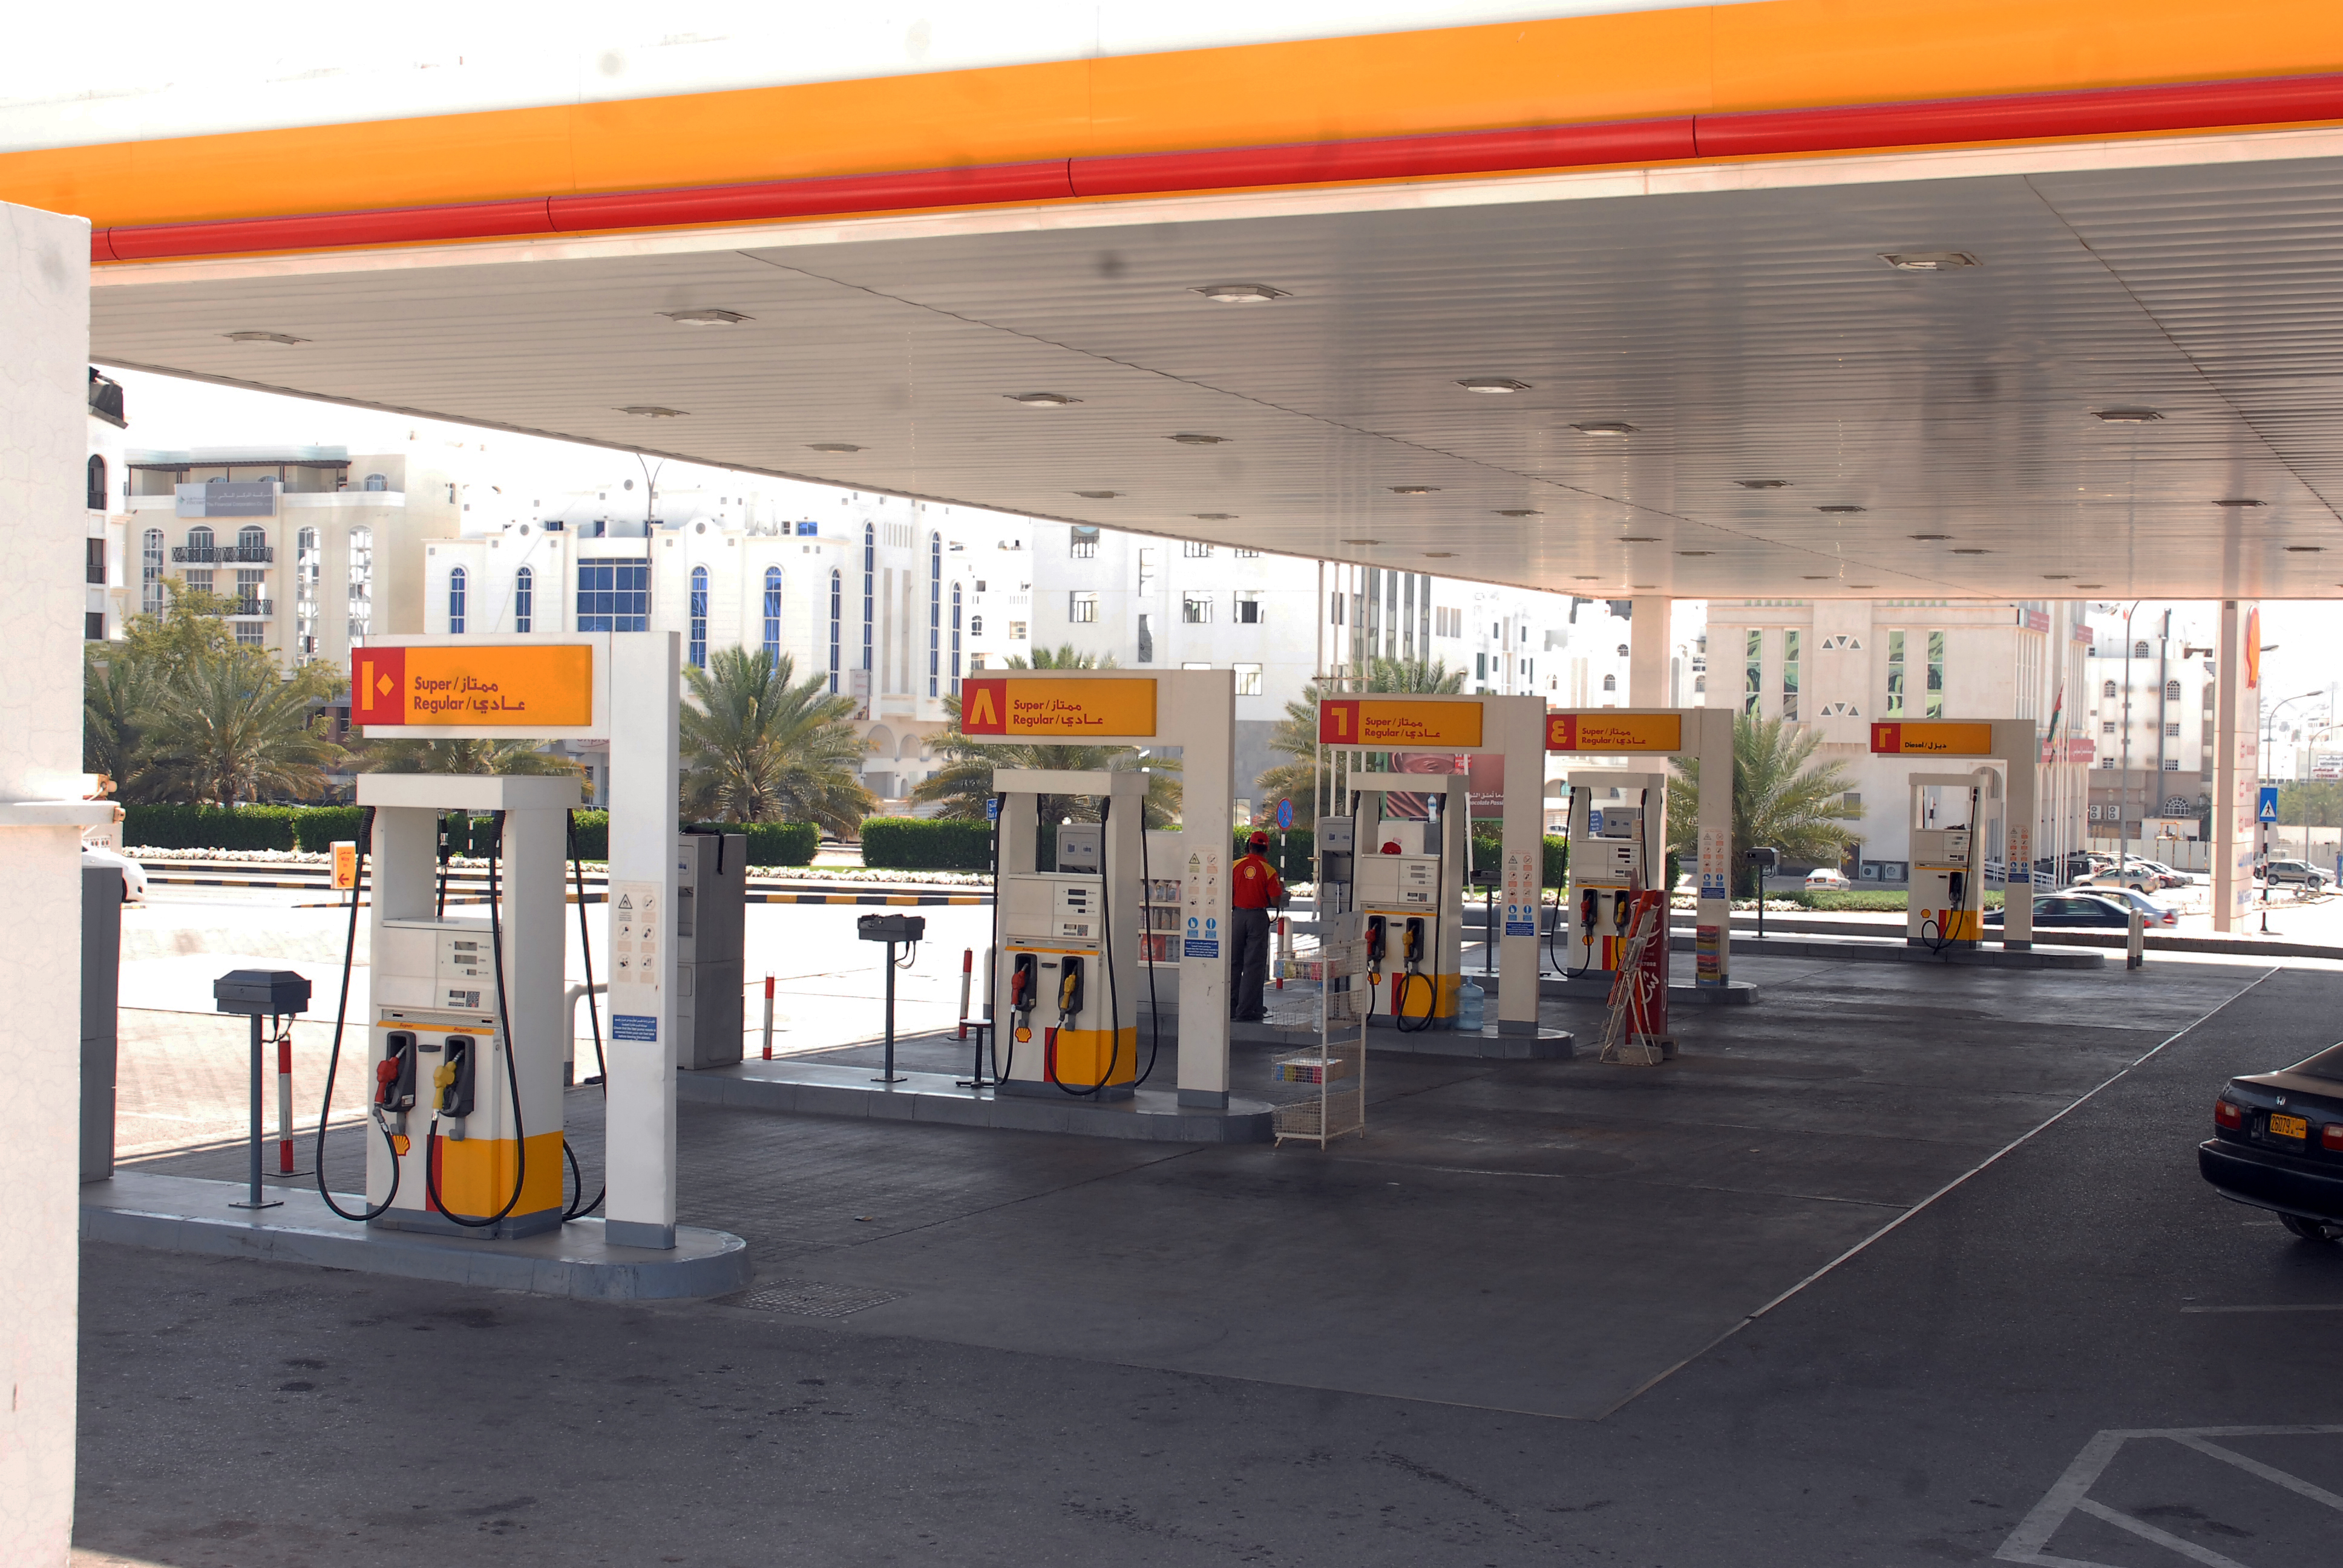 ‘Fuel subsidy cut caused marked fall in petrol demand in Oman’